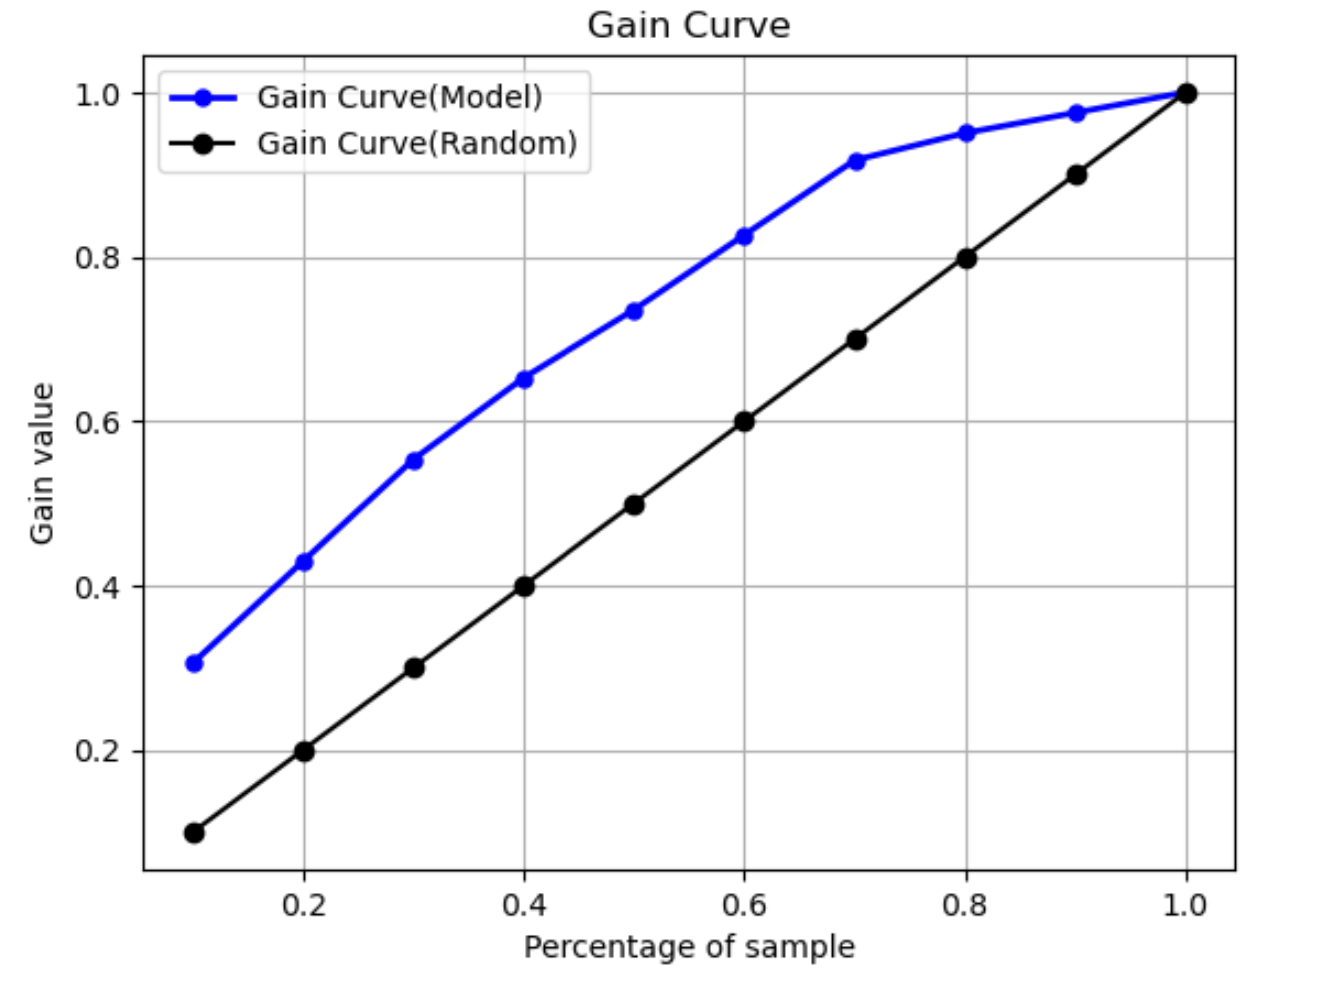 Amazon SageMaker Autopilot gain curve example with percentage and gain value.